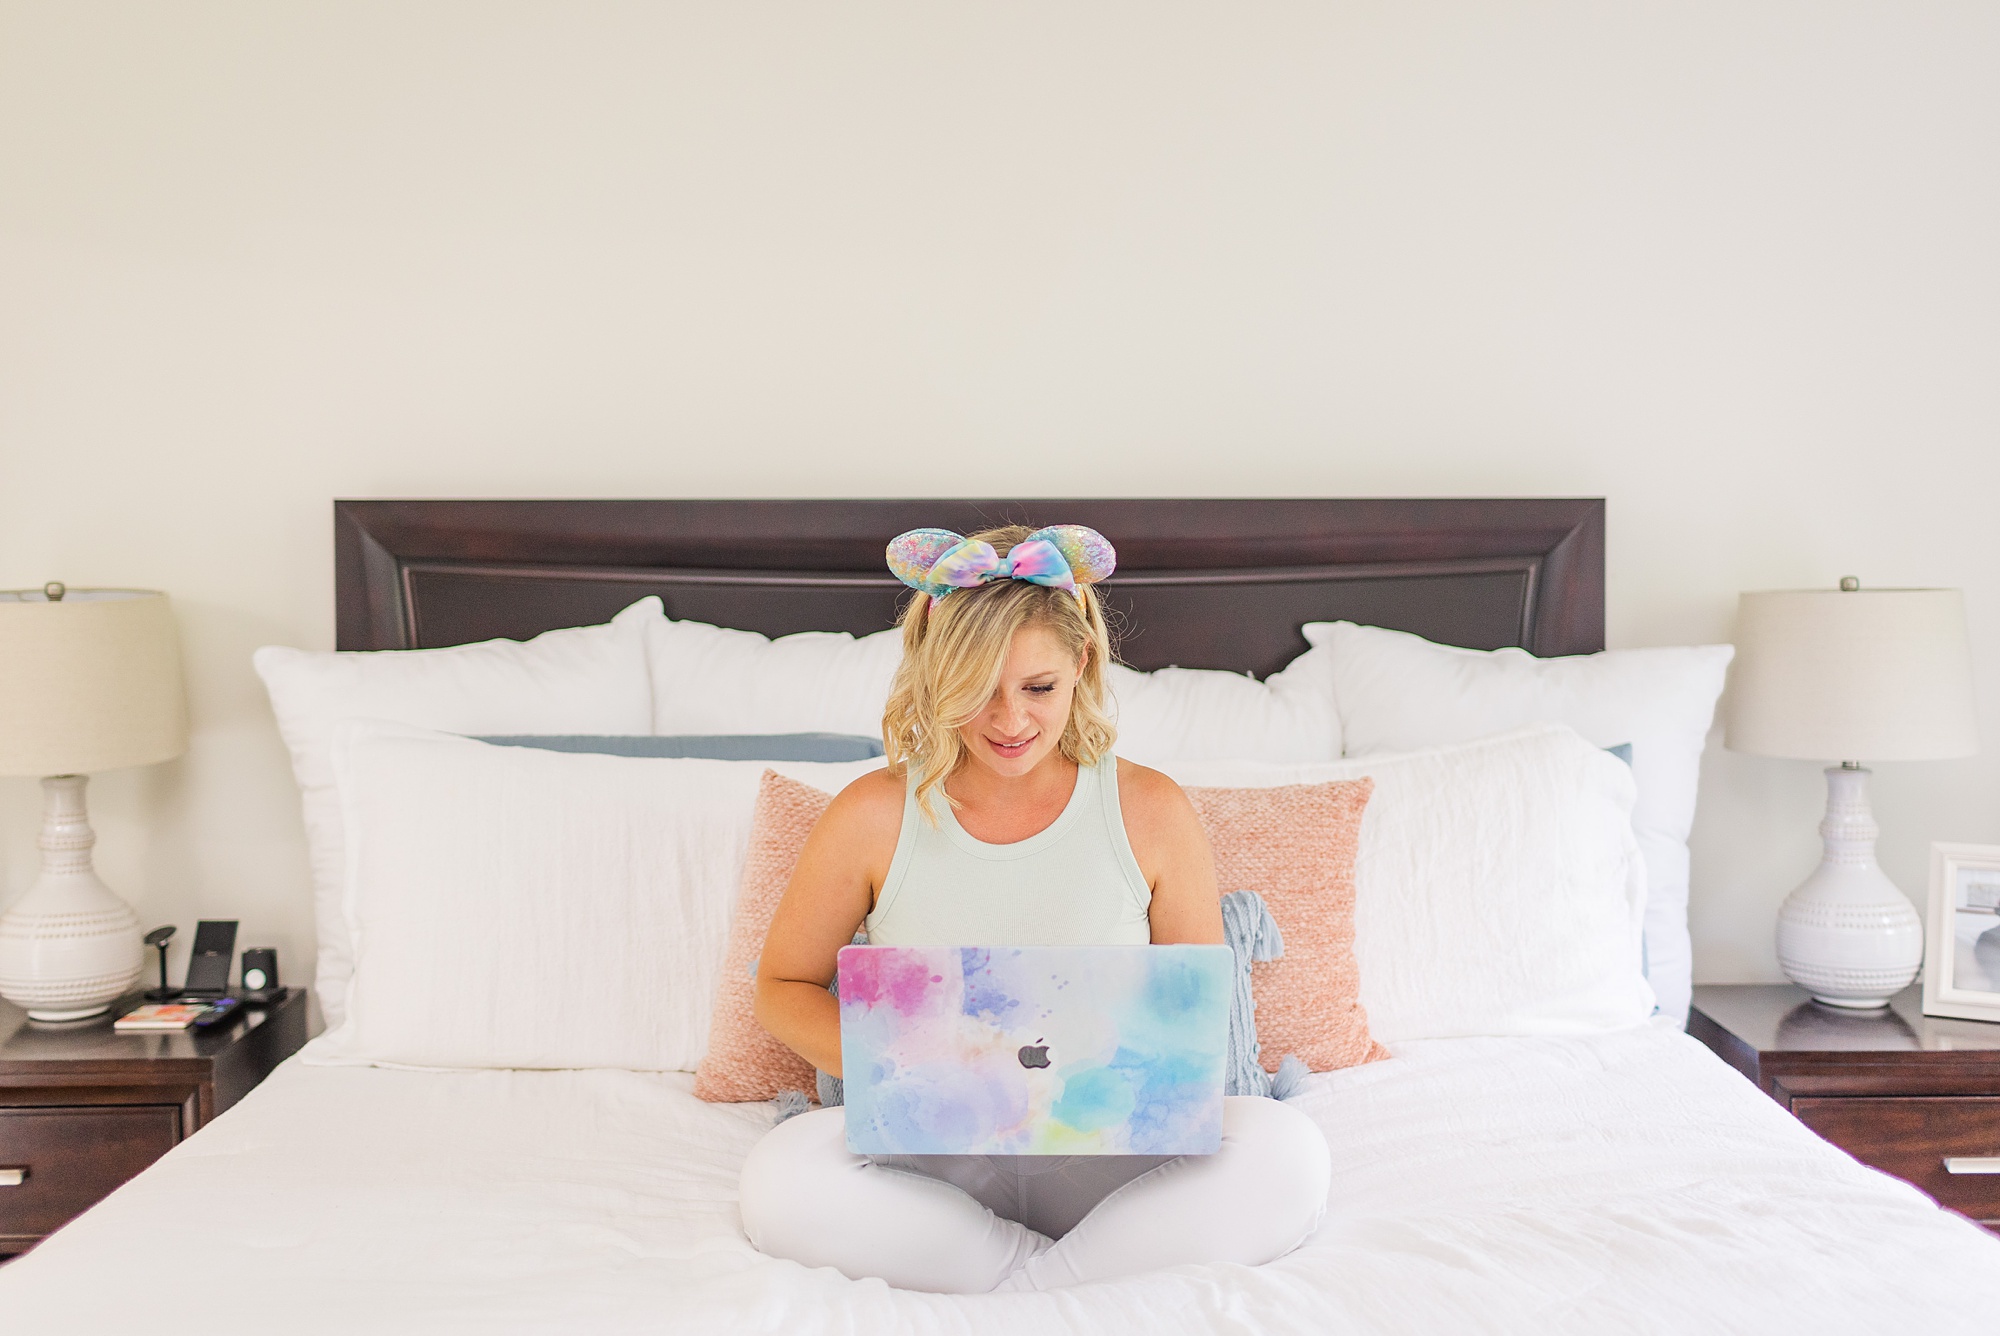 Disney planner and photographer works on laptop in bed during branding session